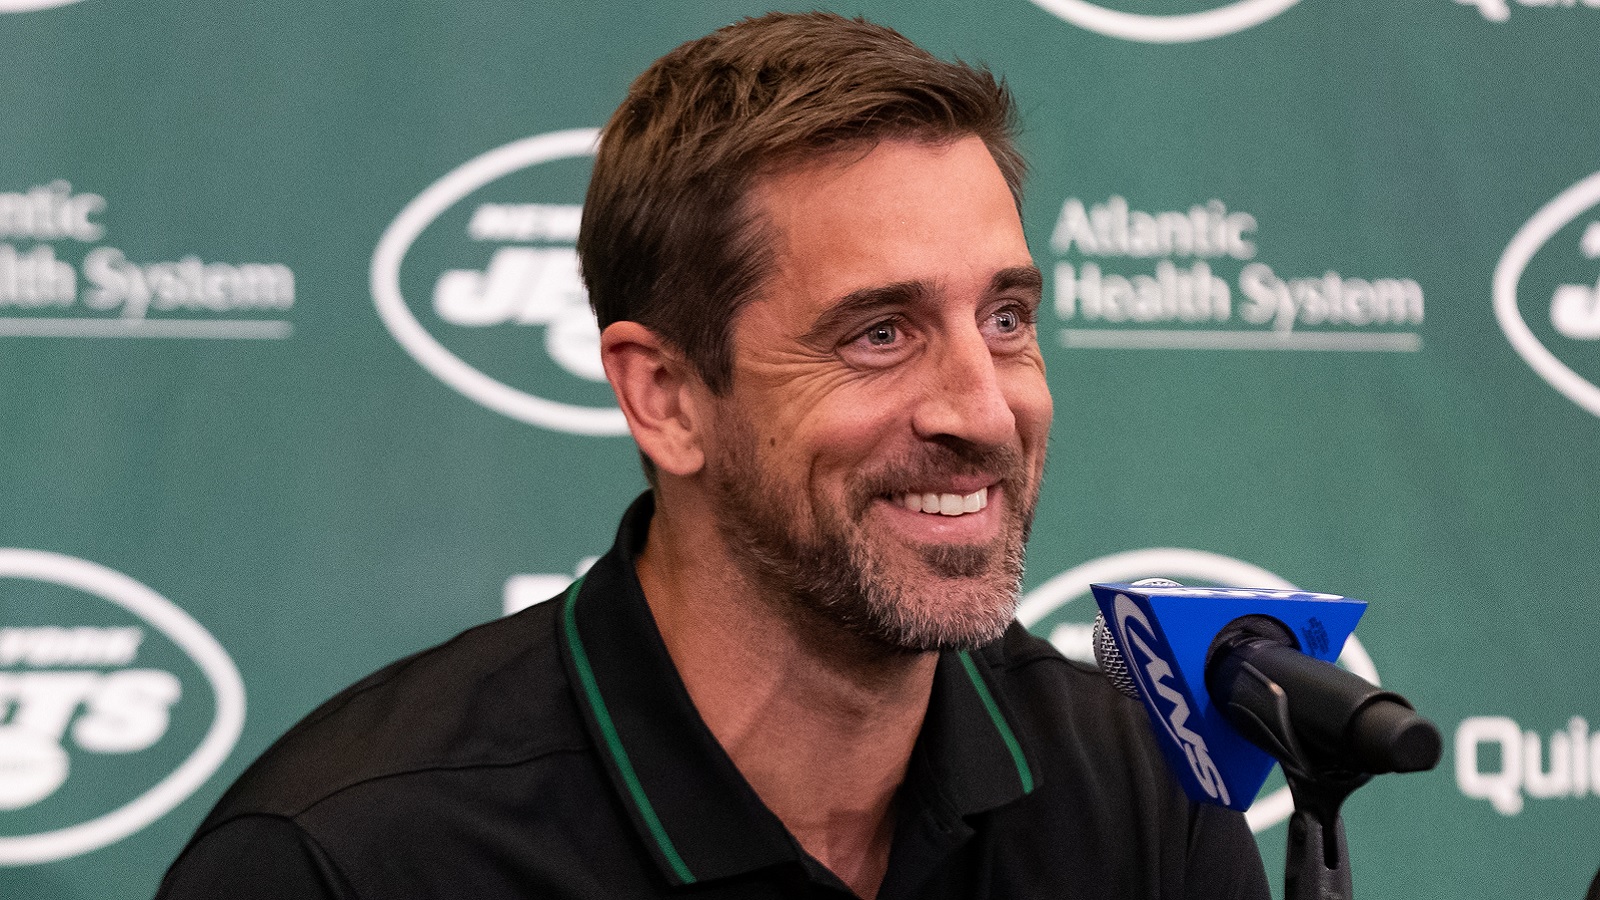 Aaron Rodgers smiling at Jets presser